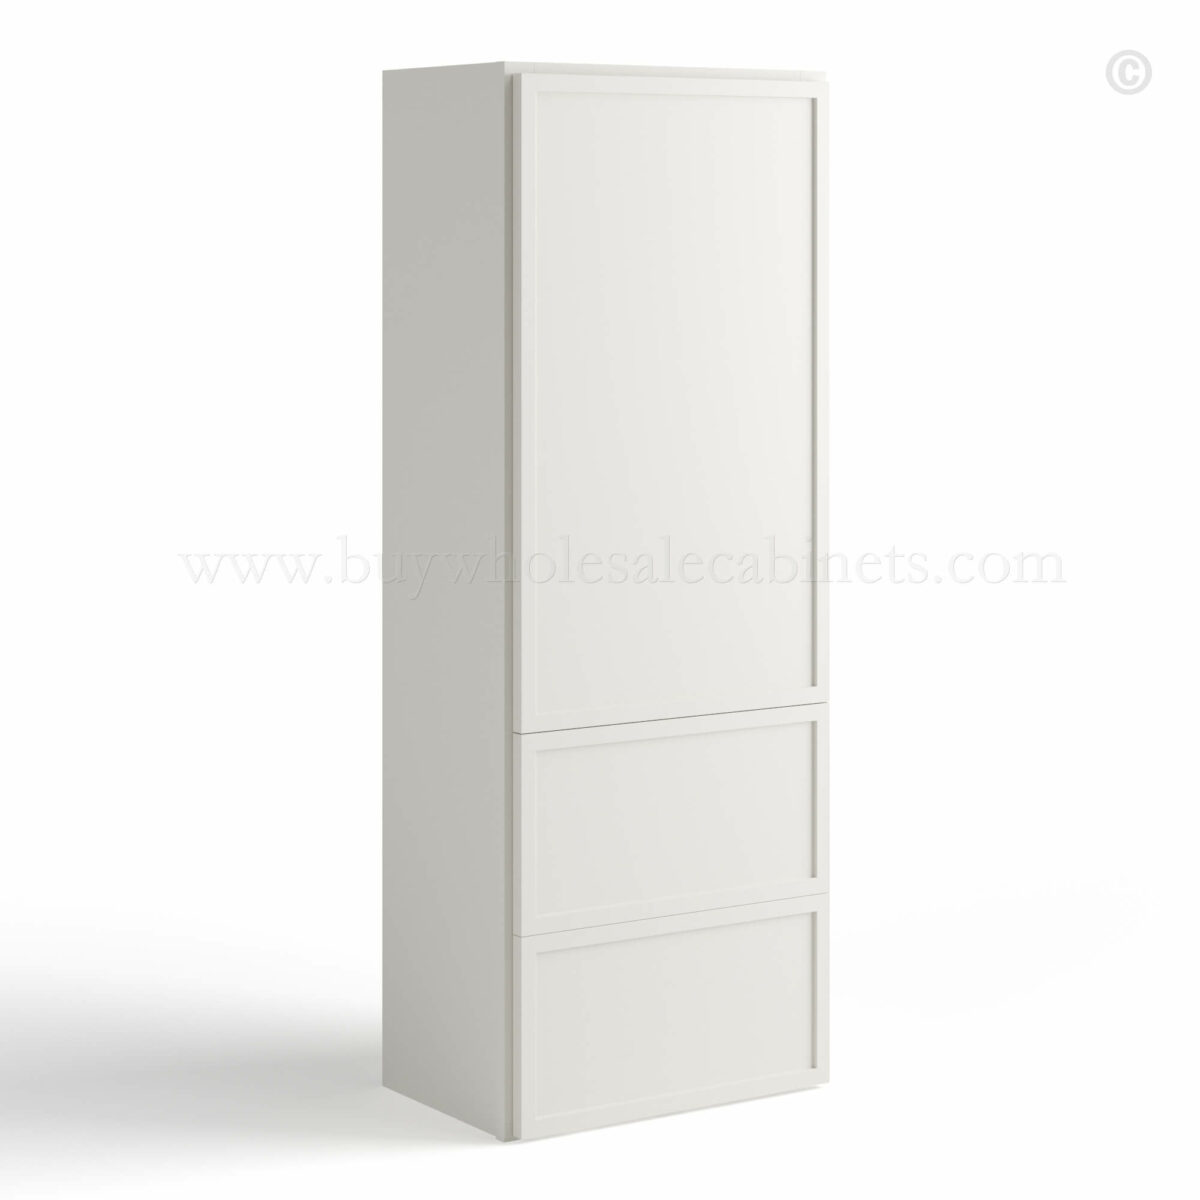 Dove White Slim Shaker Double with Drawers Wall Cabinet